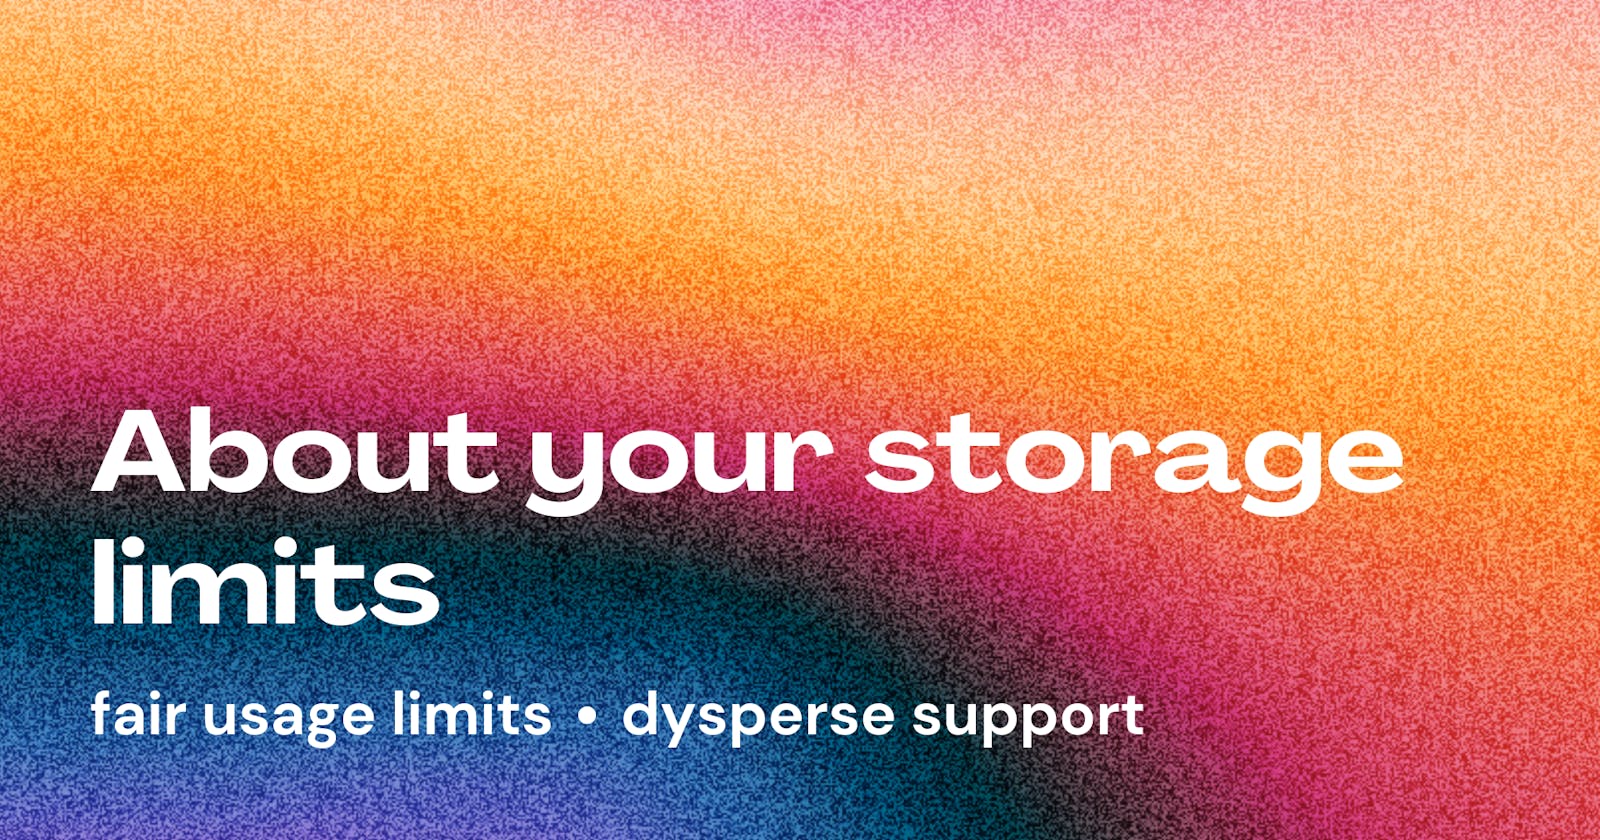 About your storage limits